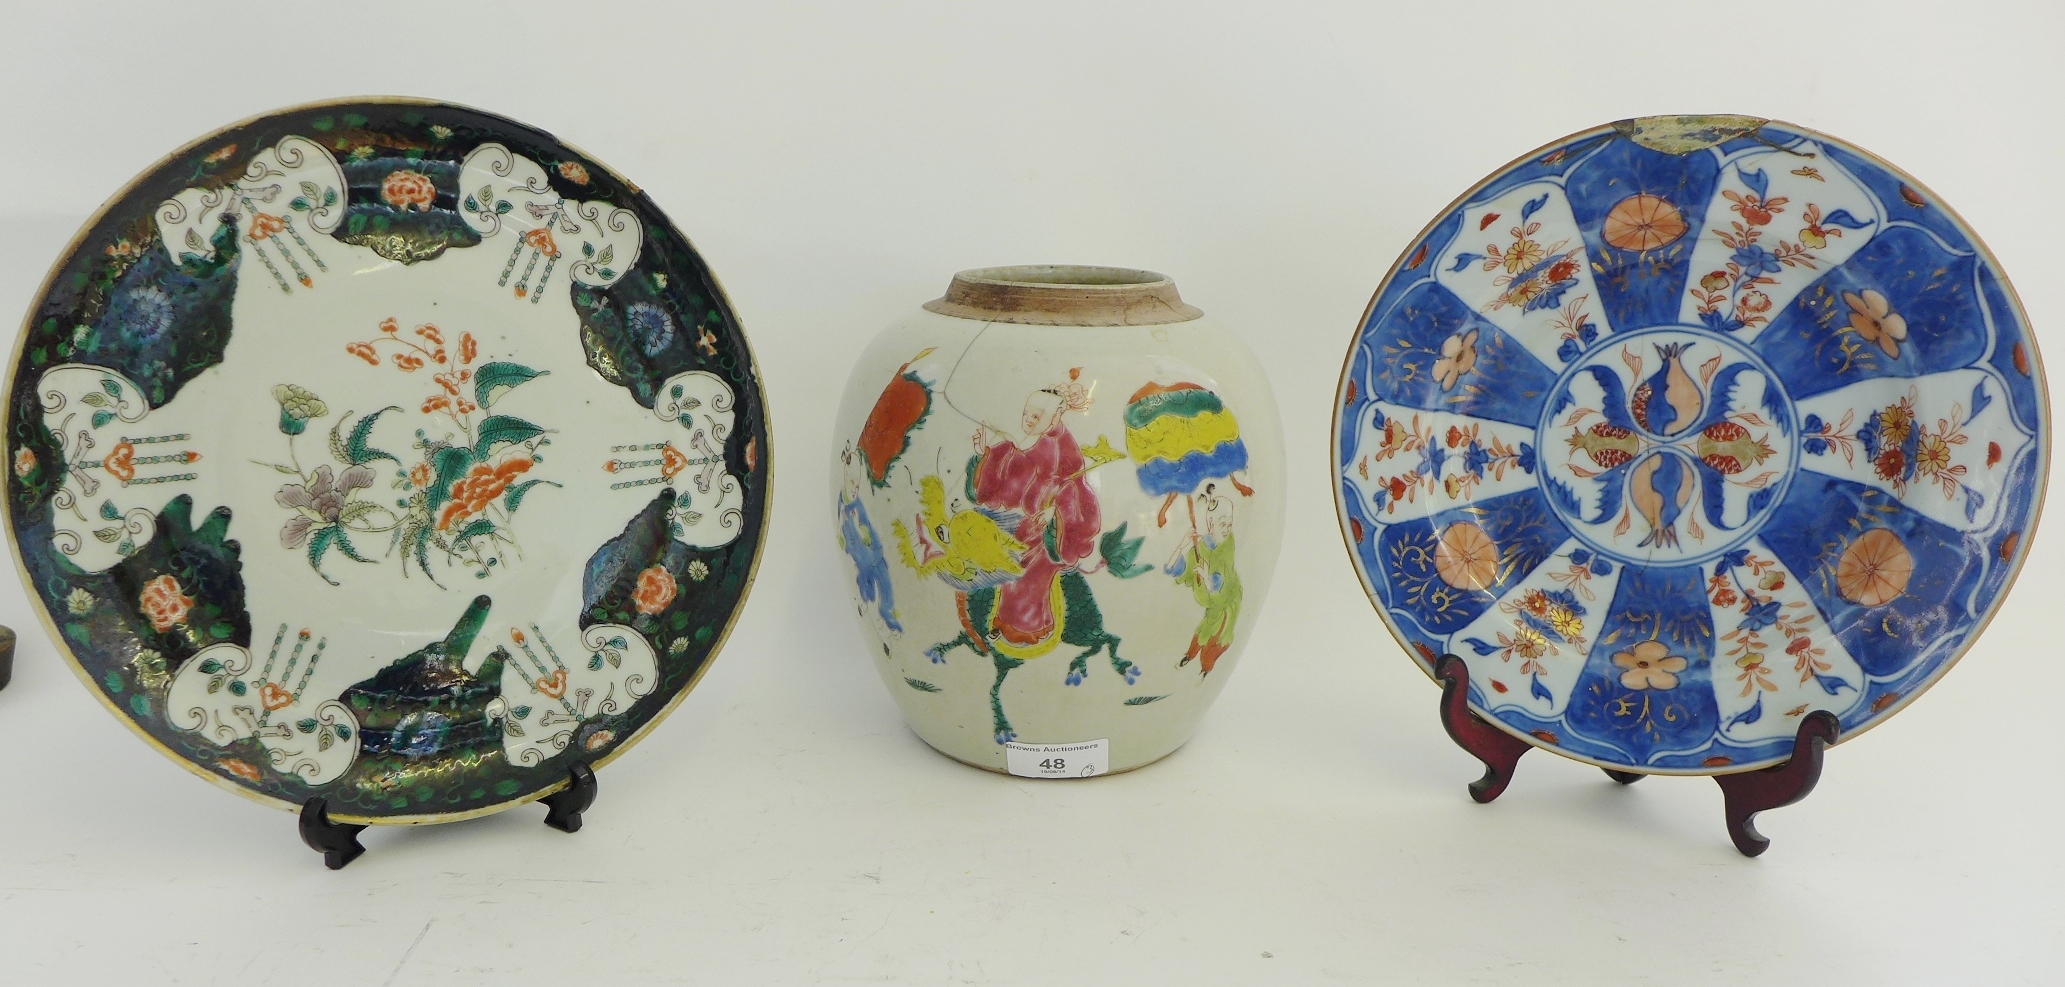 Chinese Canton enamel Famille Rose ginger jar, painted with figures together with a Chinese Famille